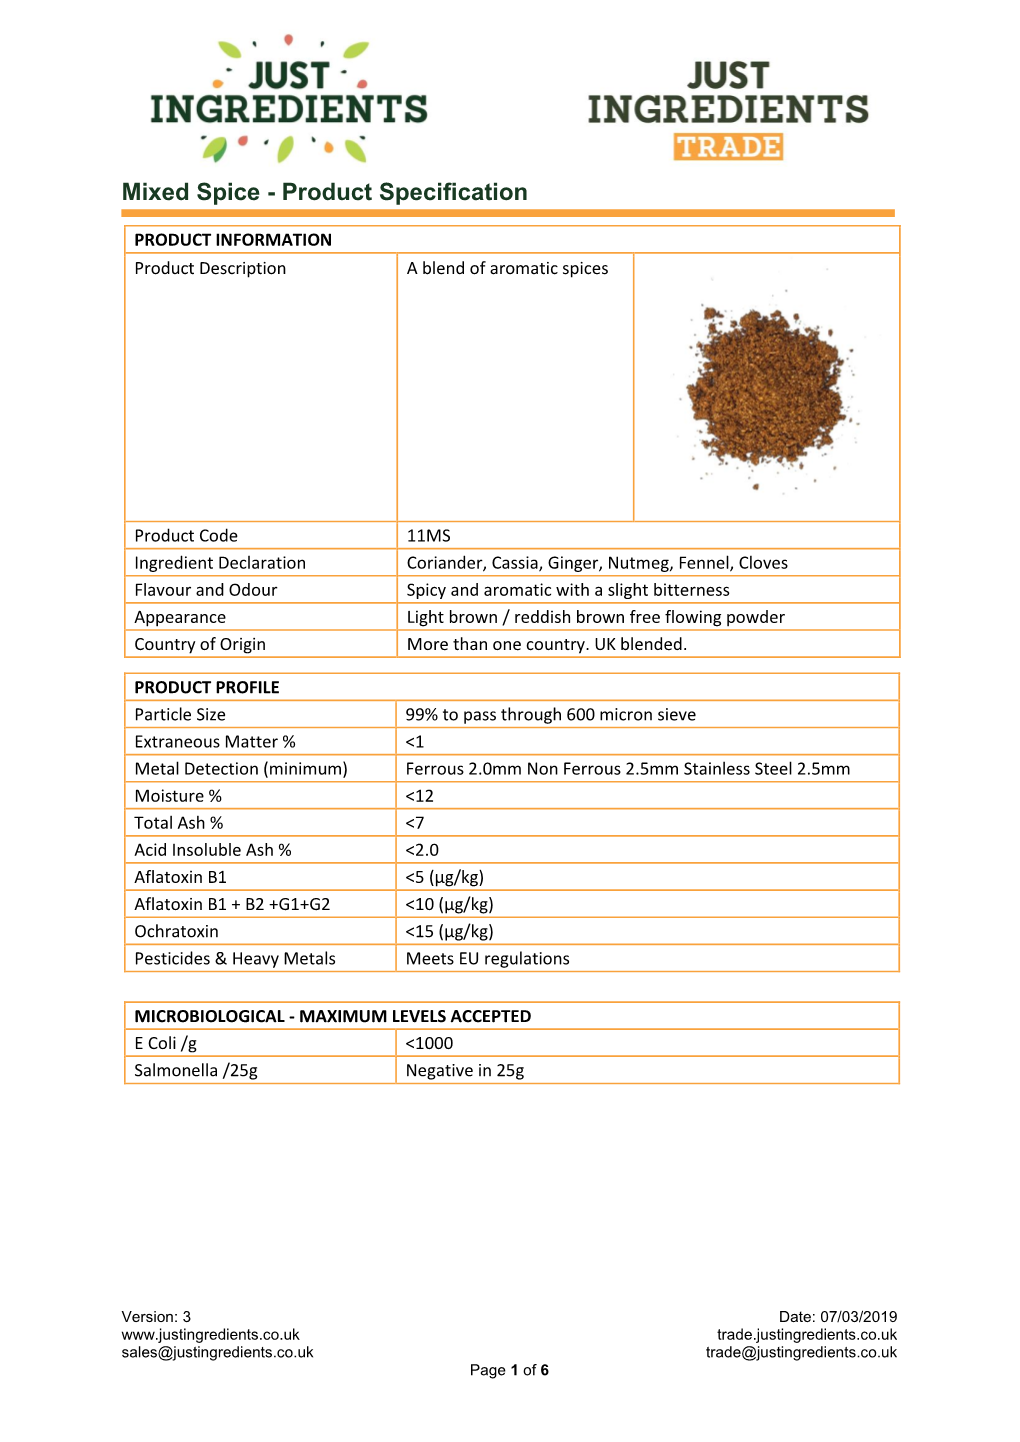 Mixed Spice - Product Specification